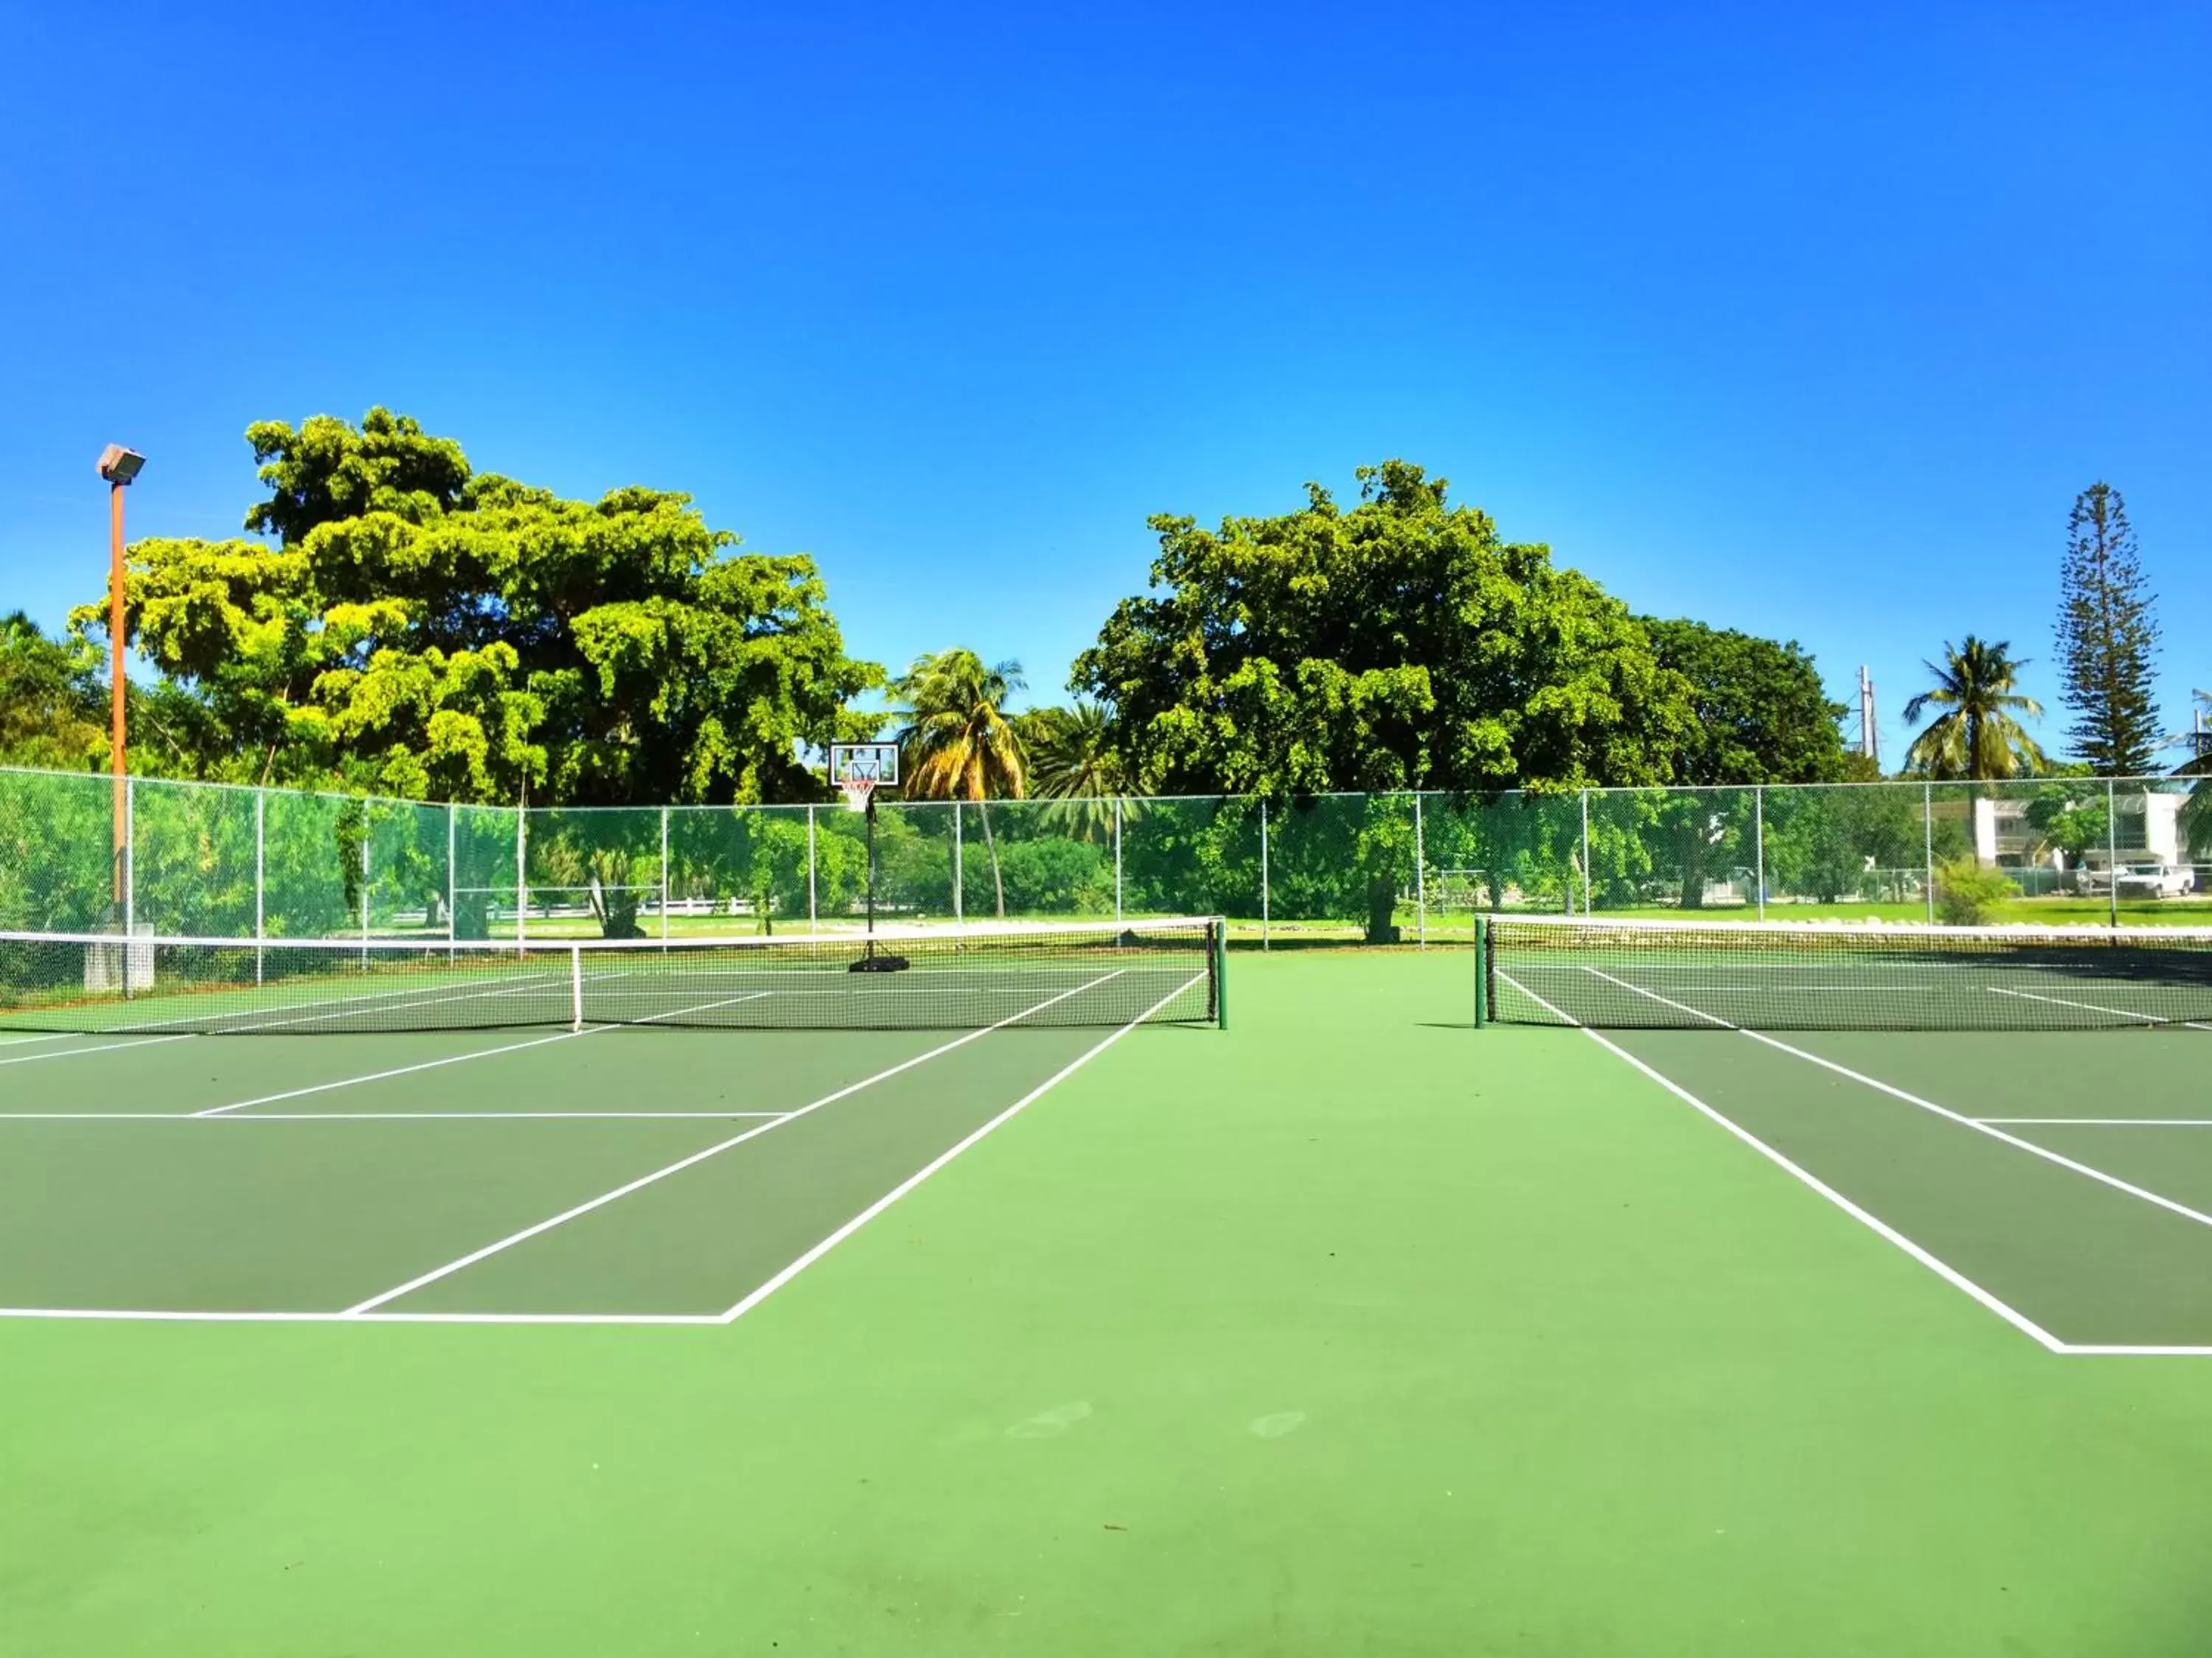 Property building, Tennis/Squash in Caloosa Cove Resort - With Full Kitchens